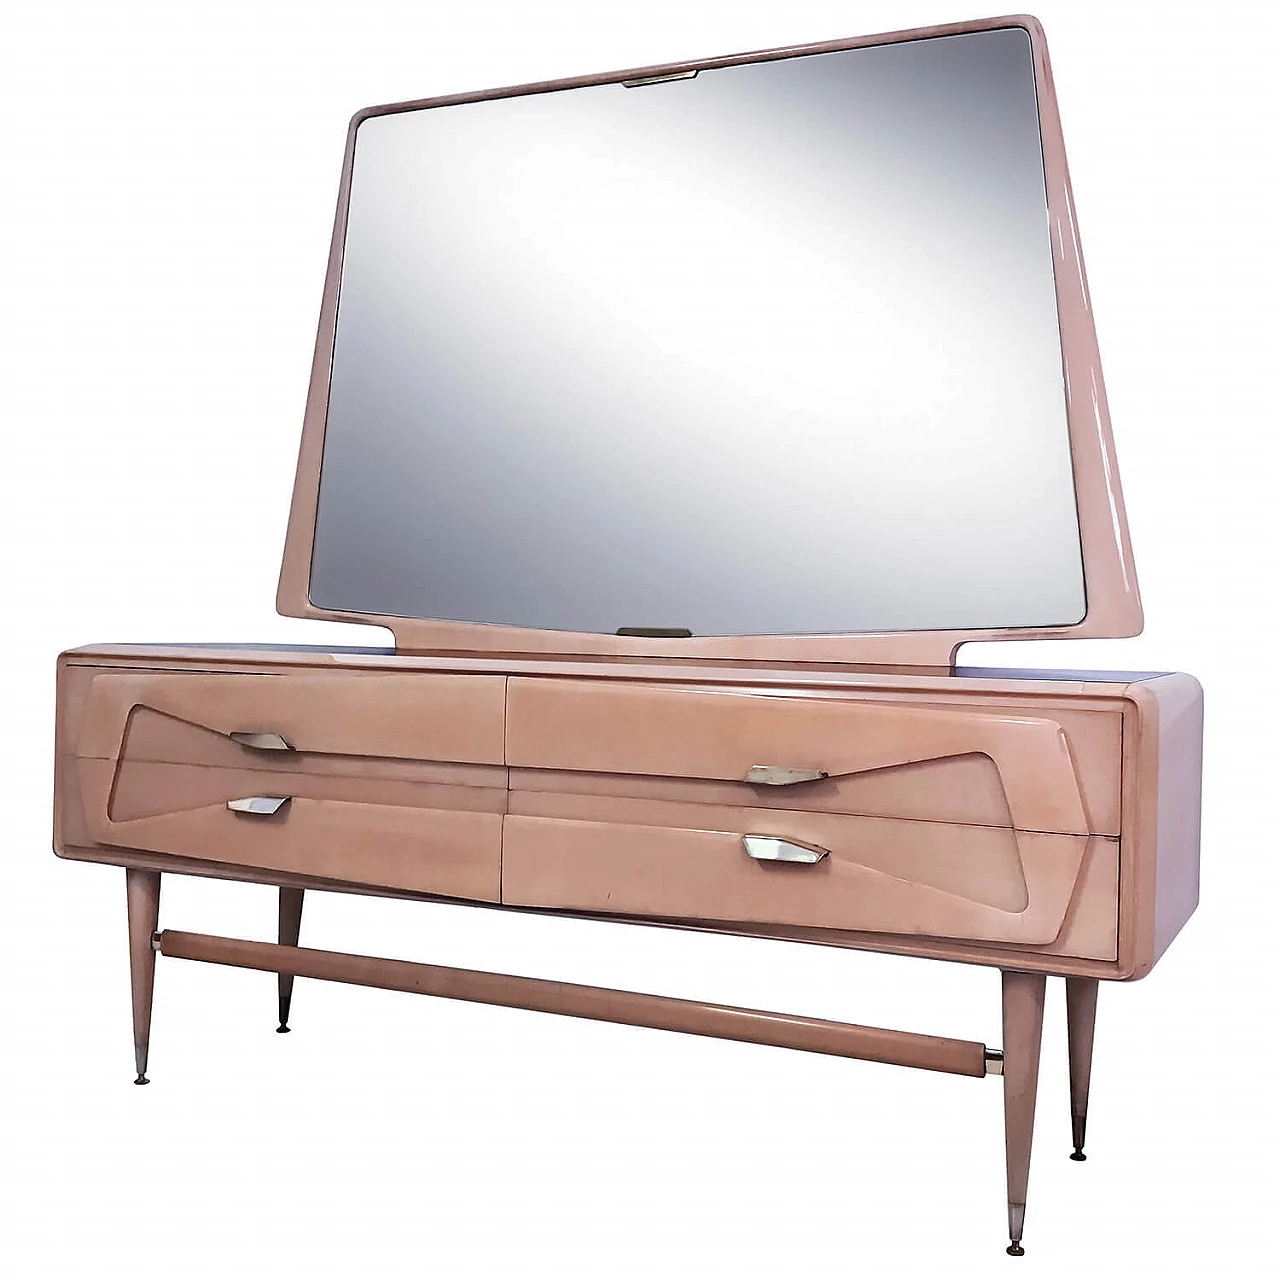 Maple chest of drawers with mirror, by Silvio Cavatorta, 1950s 1079177